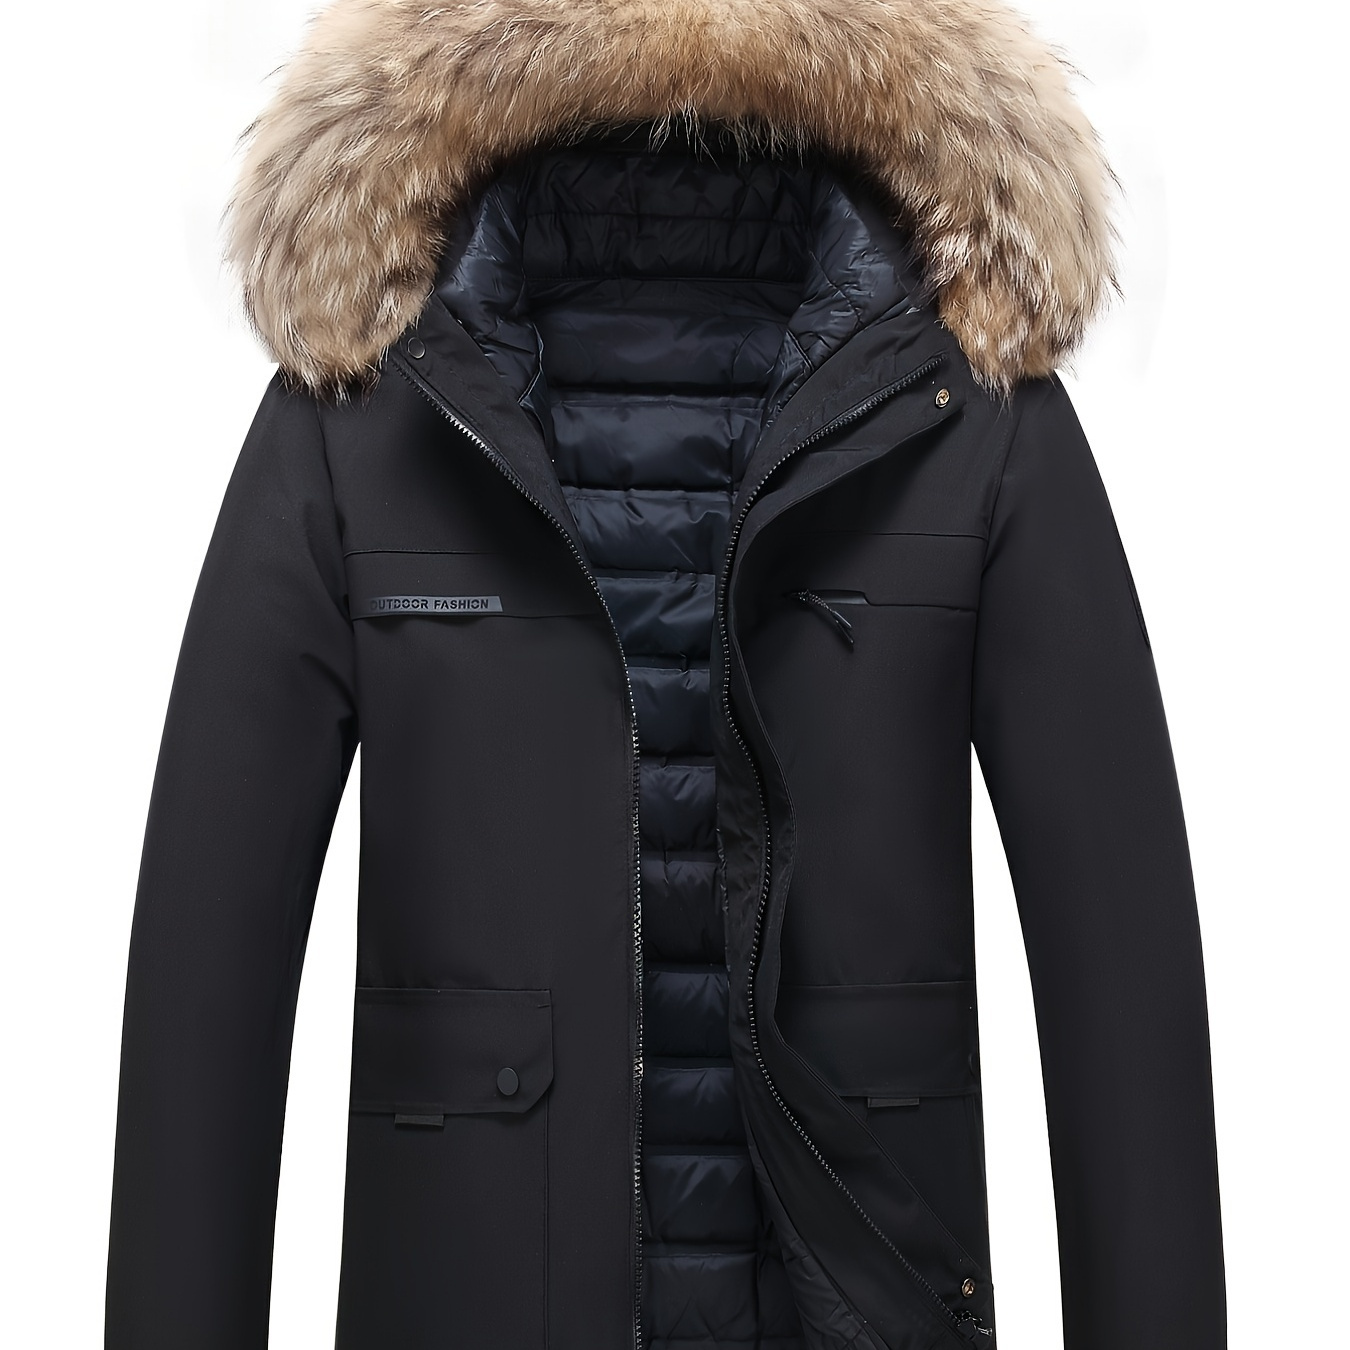 Men's New Down Jacket Long Thick Warm Winter Coat | Don't Miss These ...